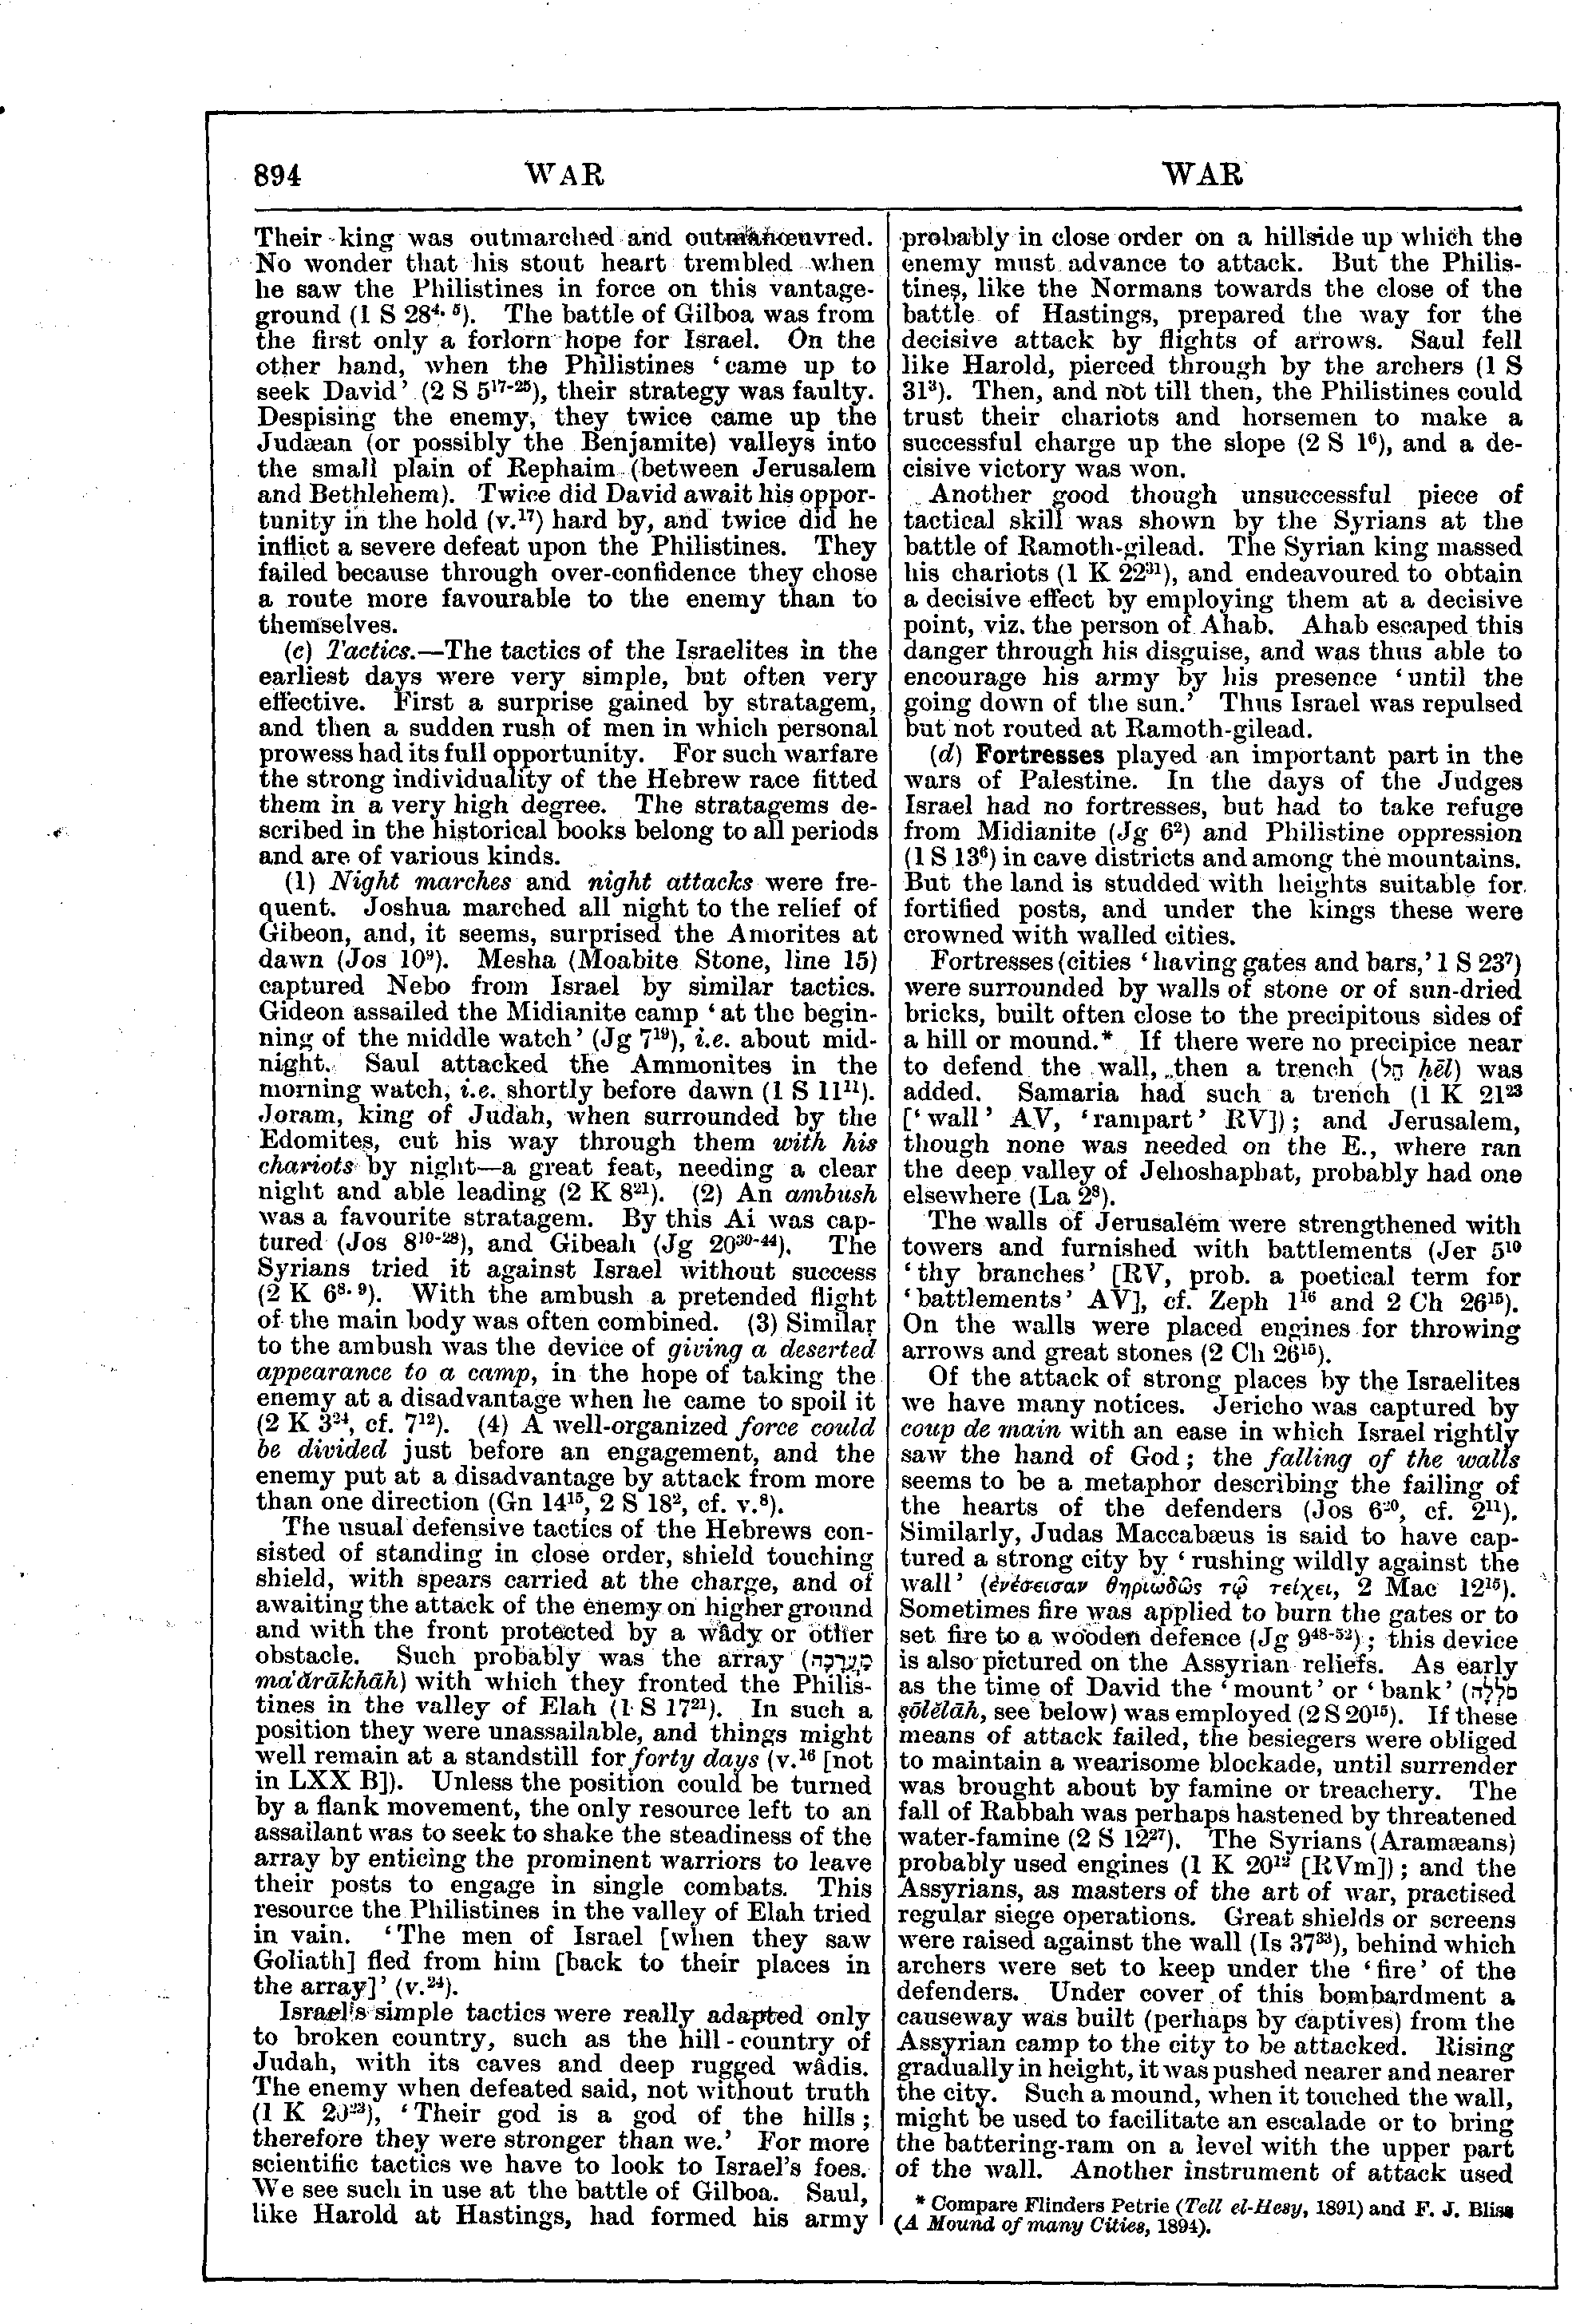 Image of page 894